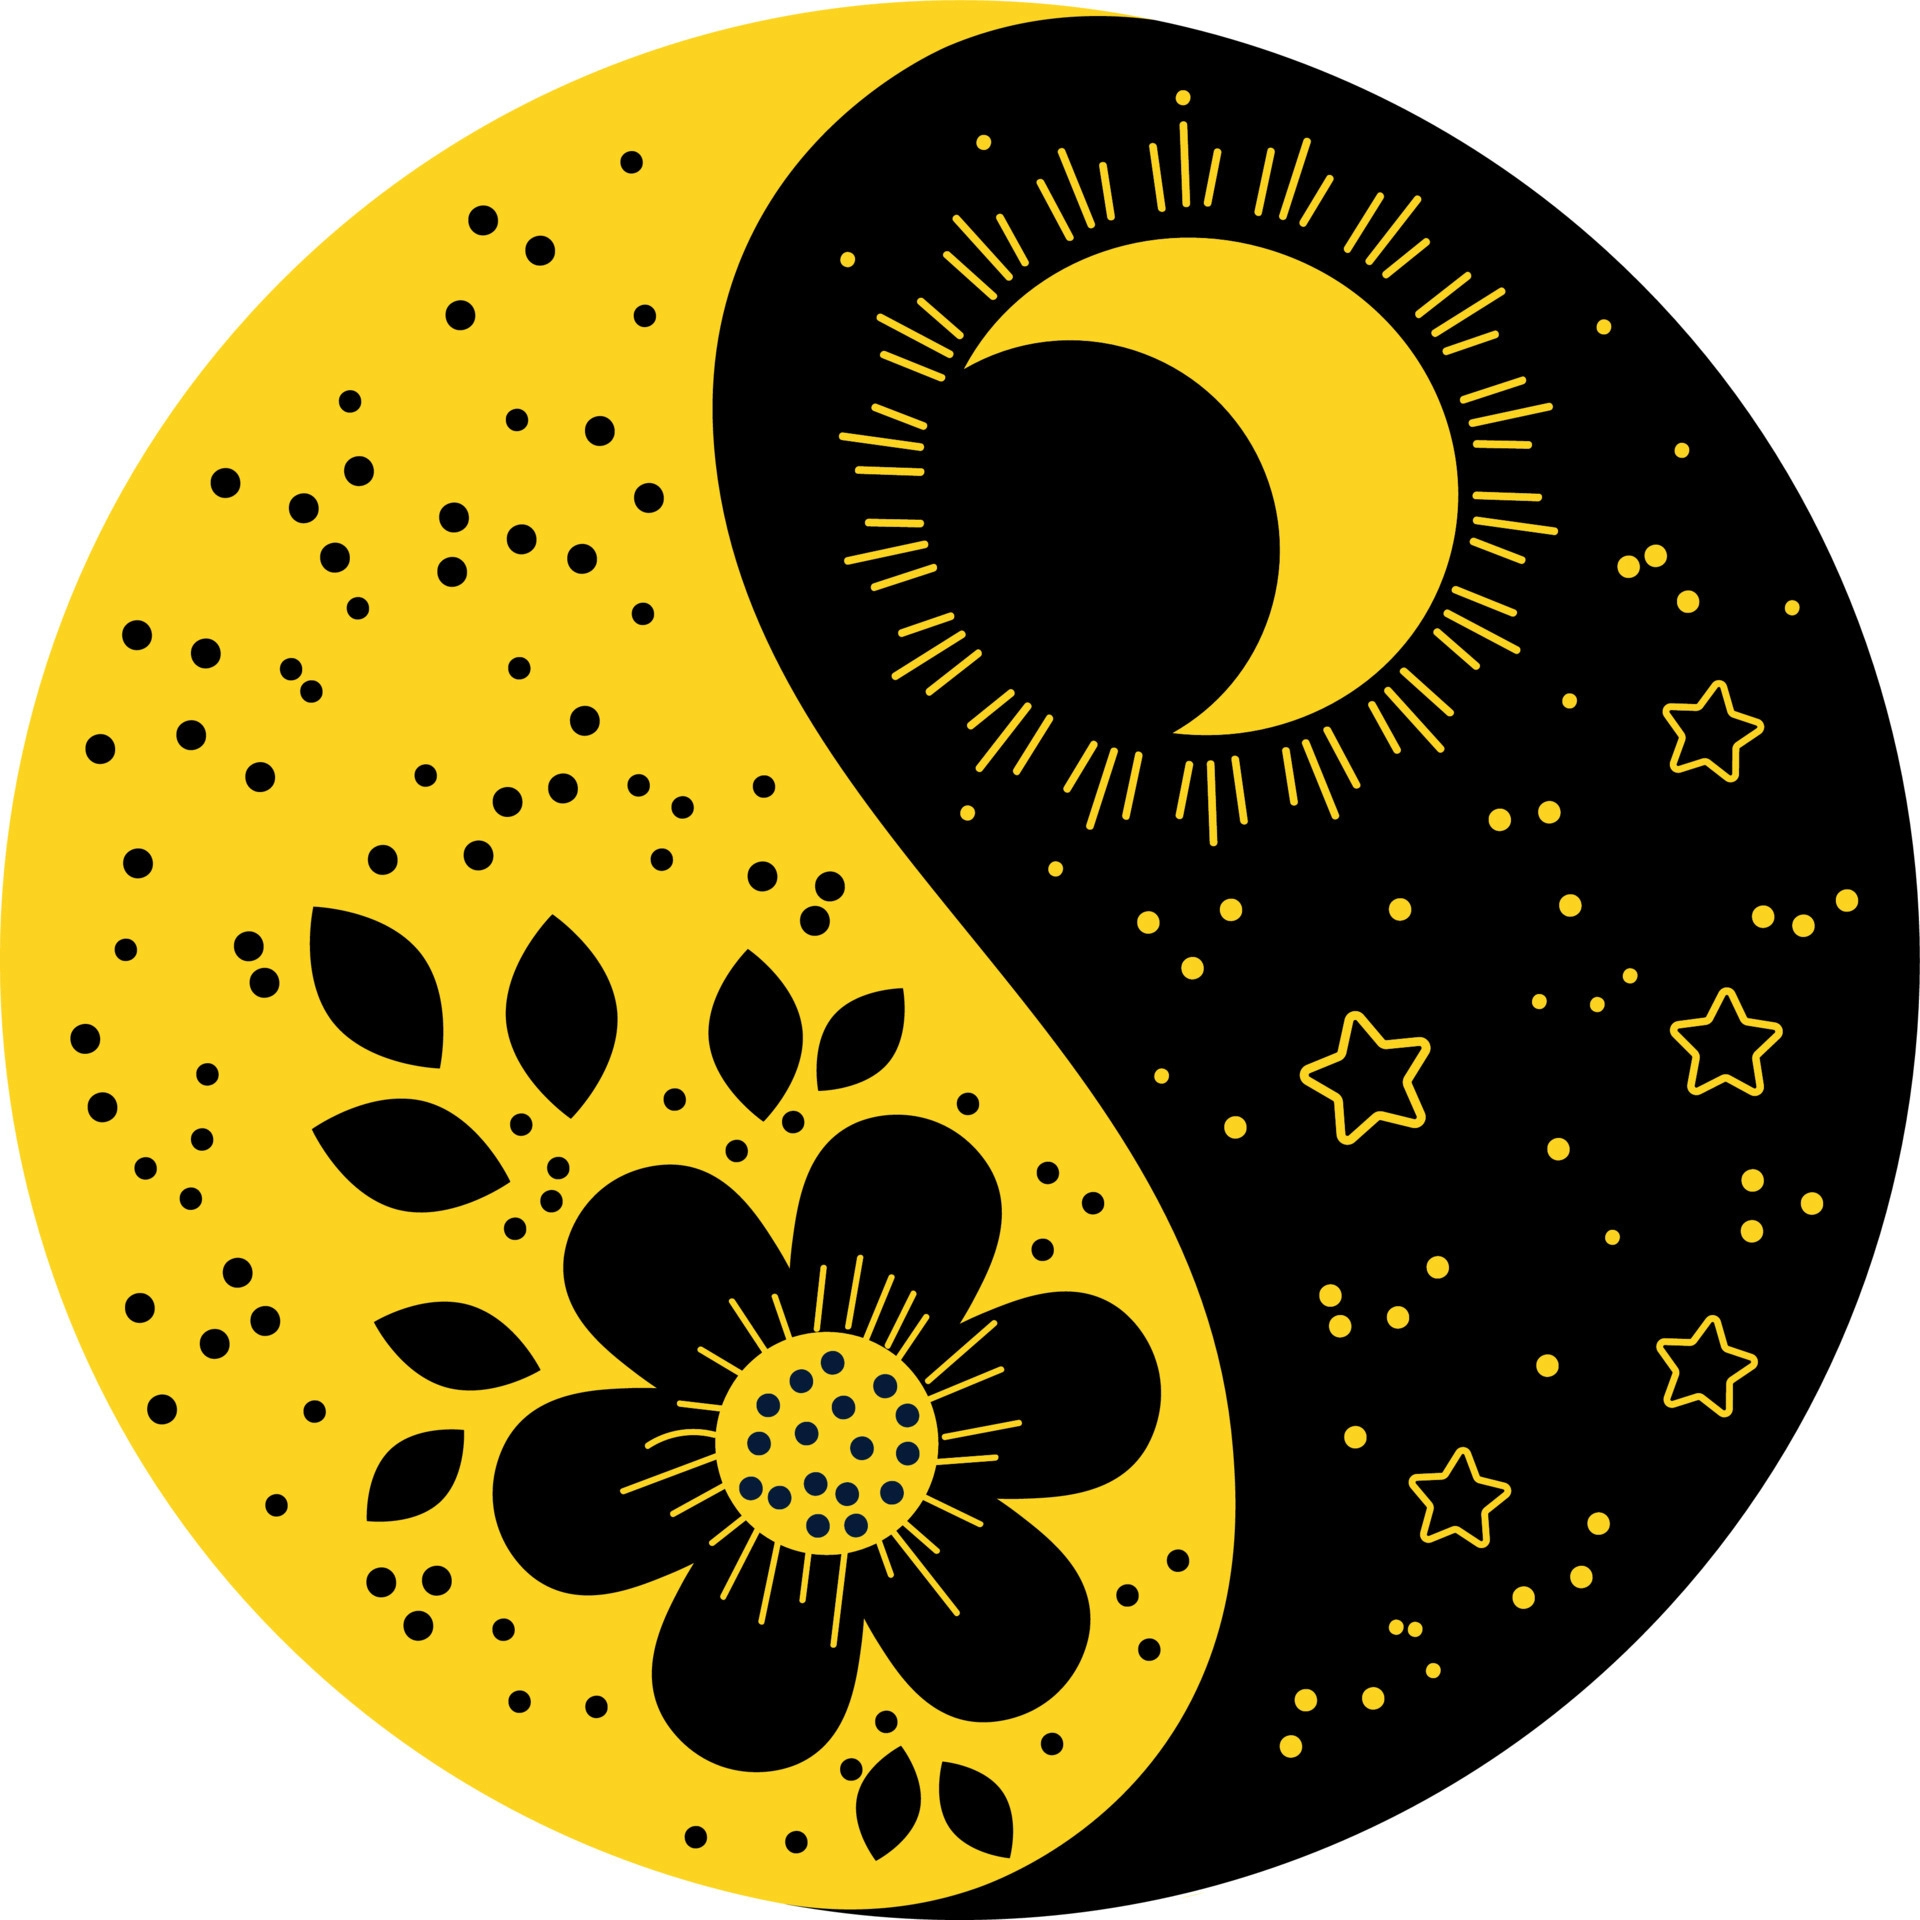 1920x1920 Yin Yang, symbol, flowers and the moon with the sun. Elegant yellow and black design for textiles, wallpapers, prints. 4787183 Vector Art at Vecteezy